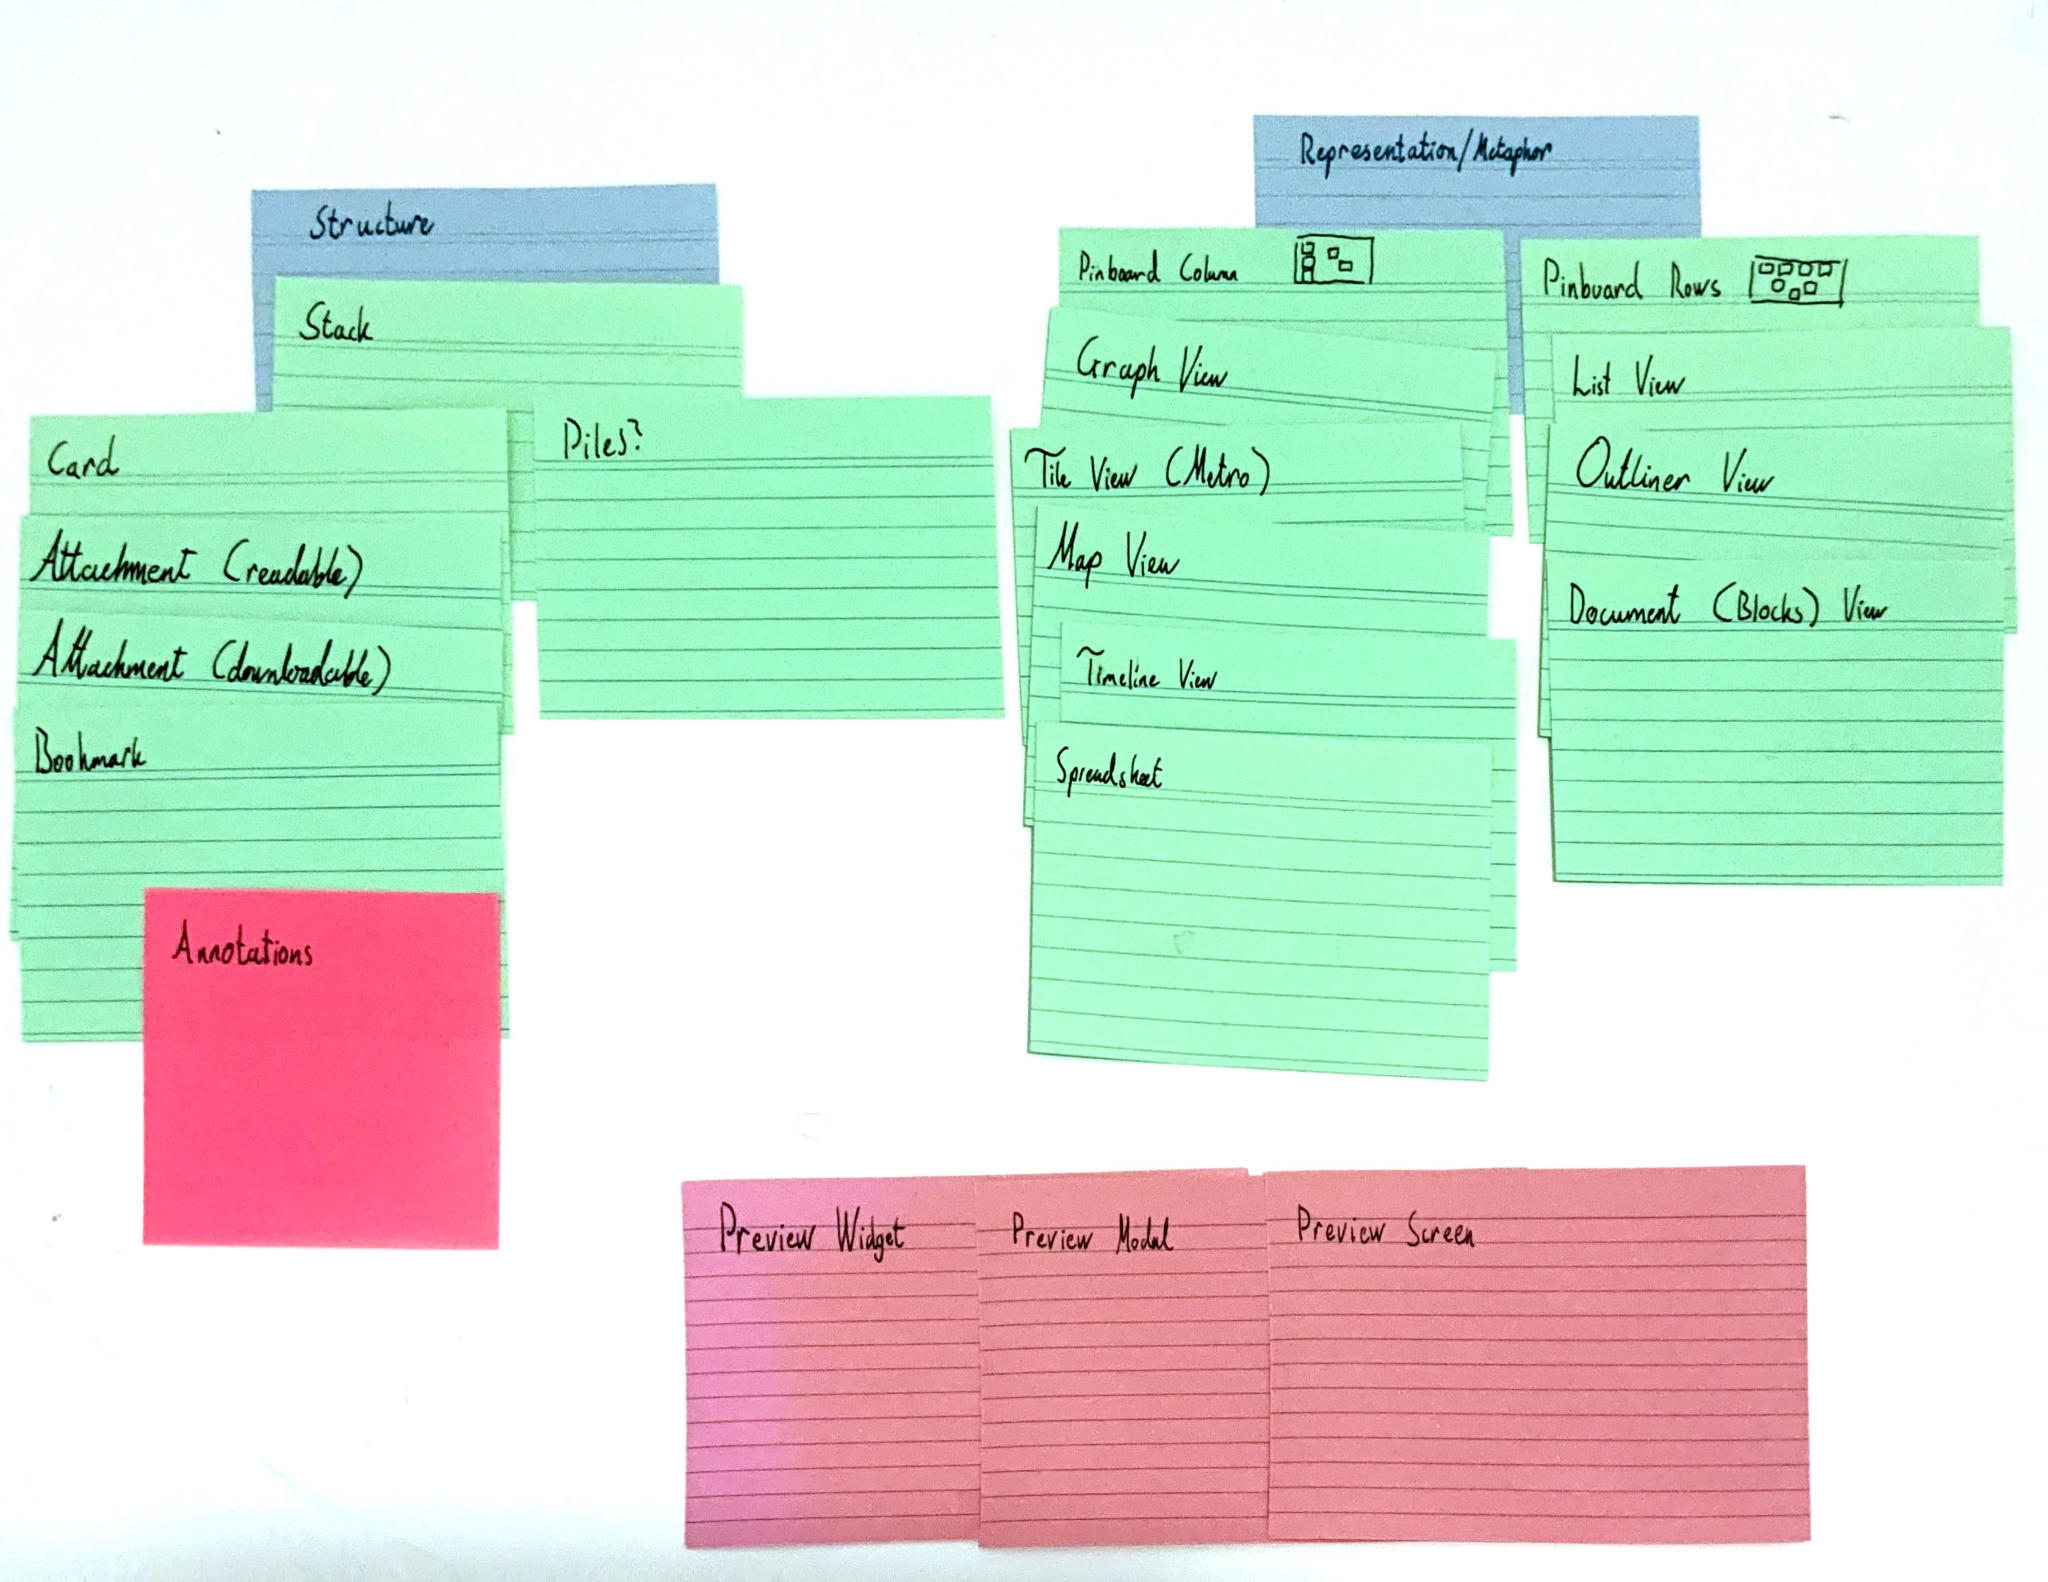 A collection of index cards stacked into two piles. One is labeled structure and has the cards: Stack, Card, Attachment (readable), Attachment (downloadable), Bookmark with Annotations as a post-it, and Piles(?). The other is labeled representation and has the cards: Pinboard Column, Pinboard Rows, Graph View, List View, Tile View, Outliner View, Map View, Document (Blocks), Time line View, and Spreadsheet